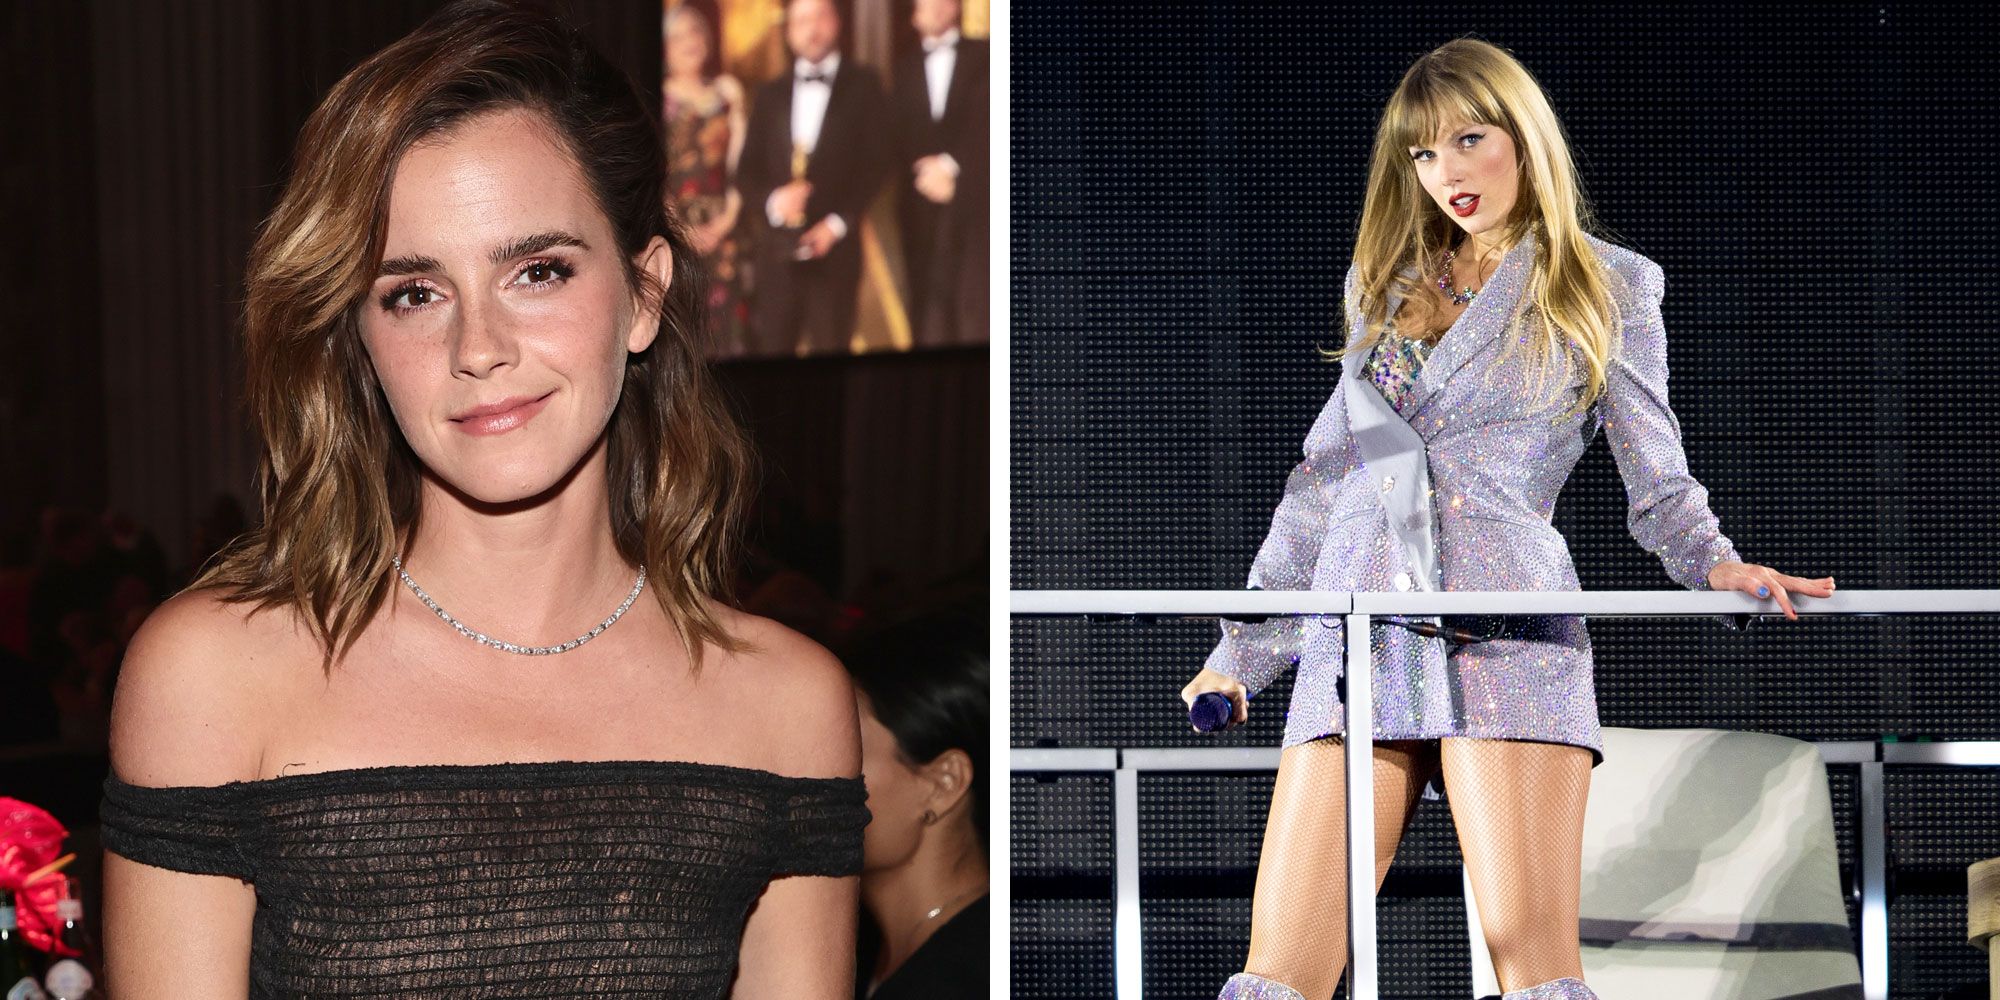 Emma Watson Seen At Taylor Swift Concert With Ex Brendan Wallace